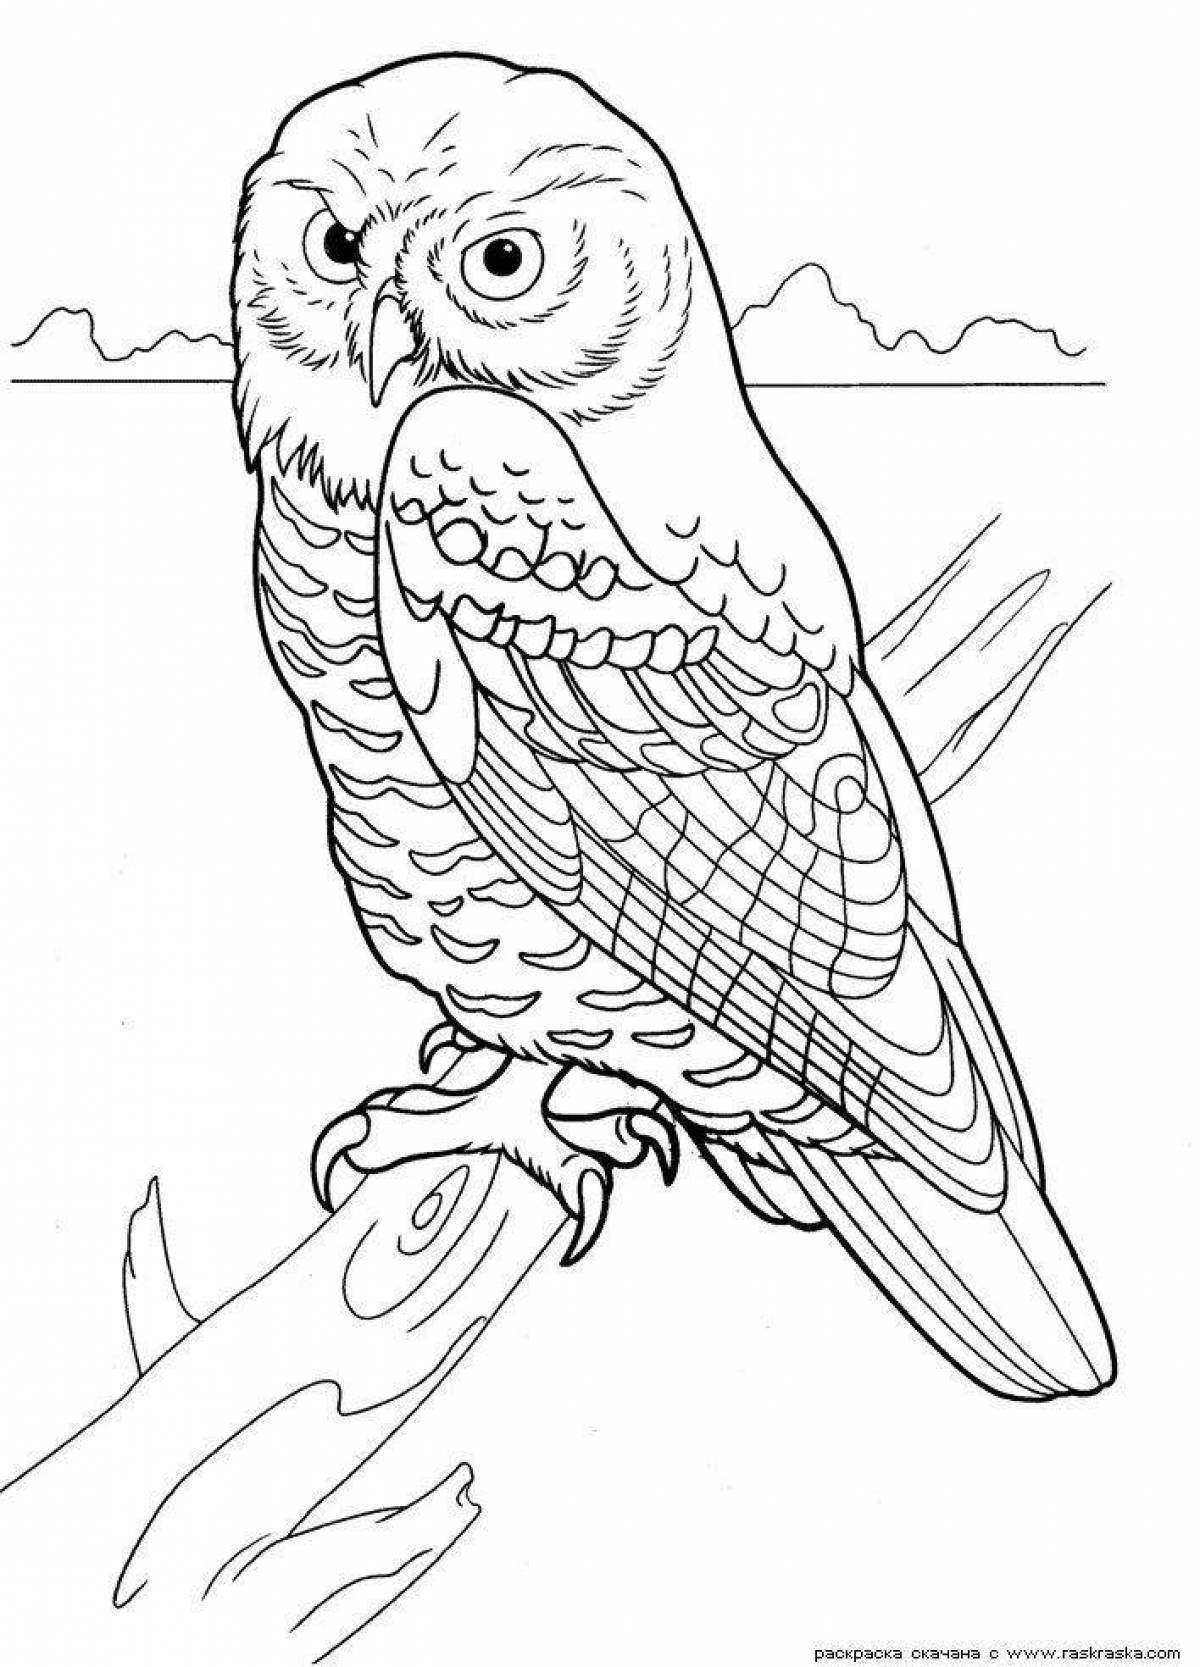 Majestic owl coloring book for kids